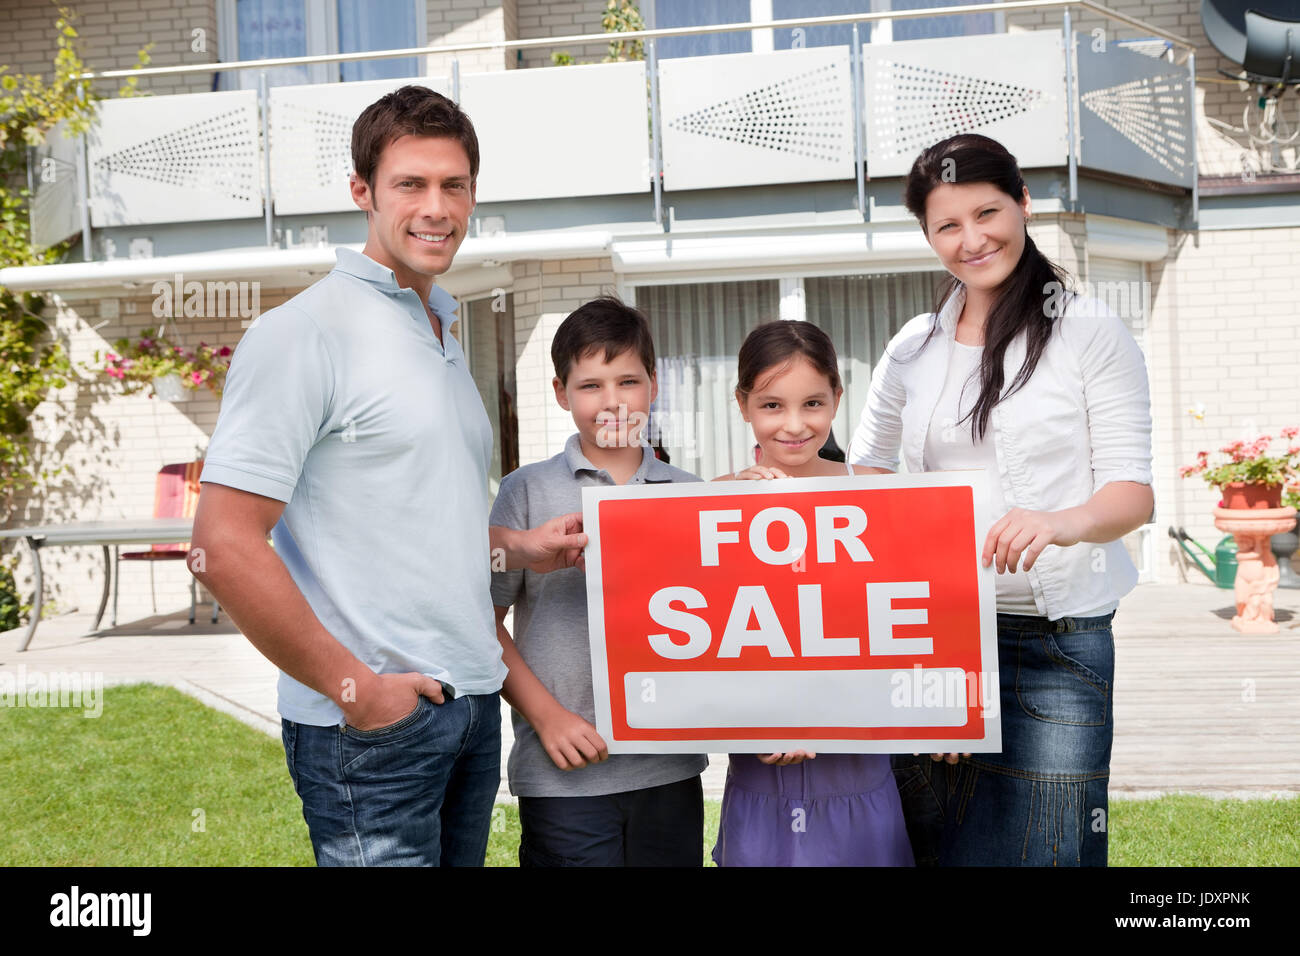 Portrait of family holding for sale sign standing outside their house ...